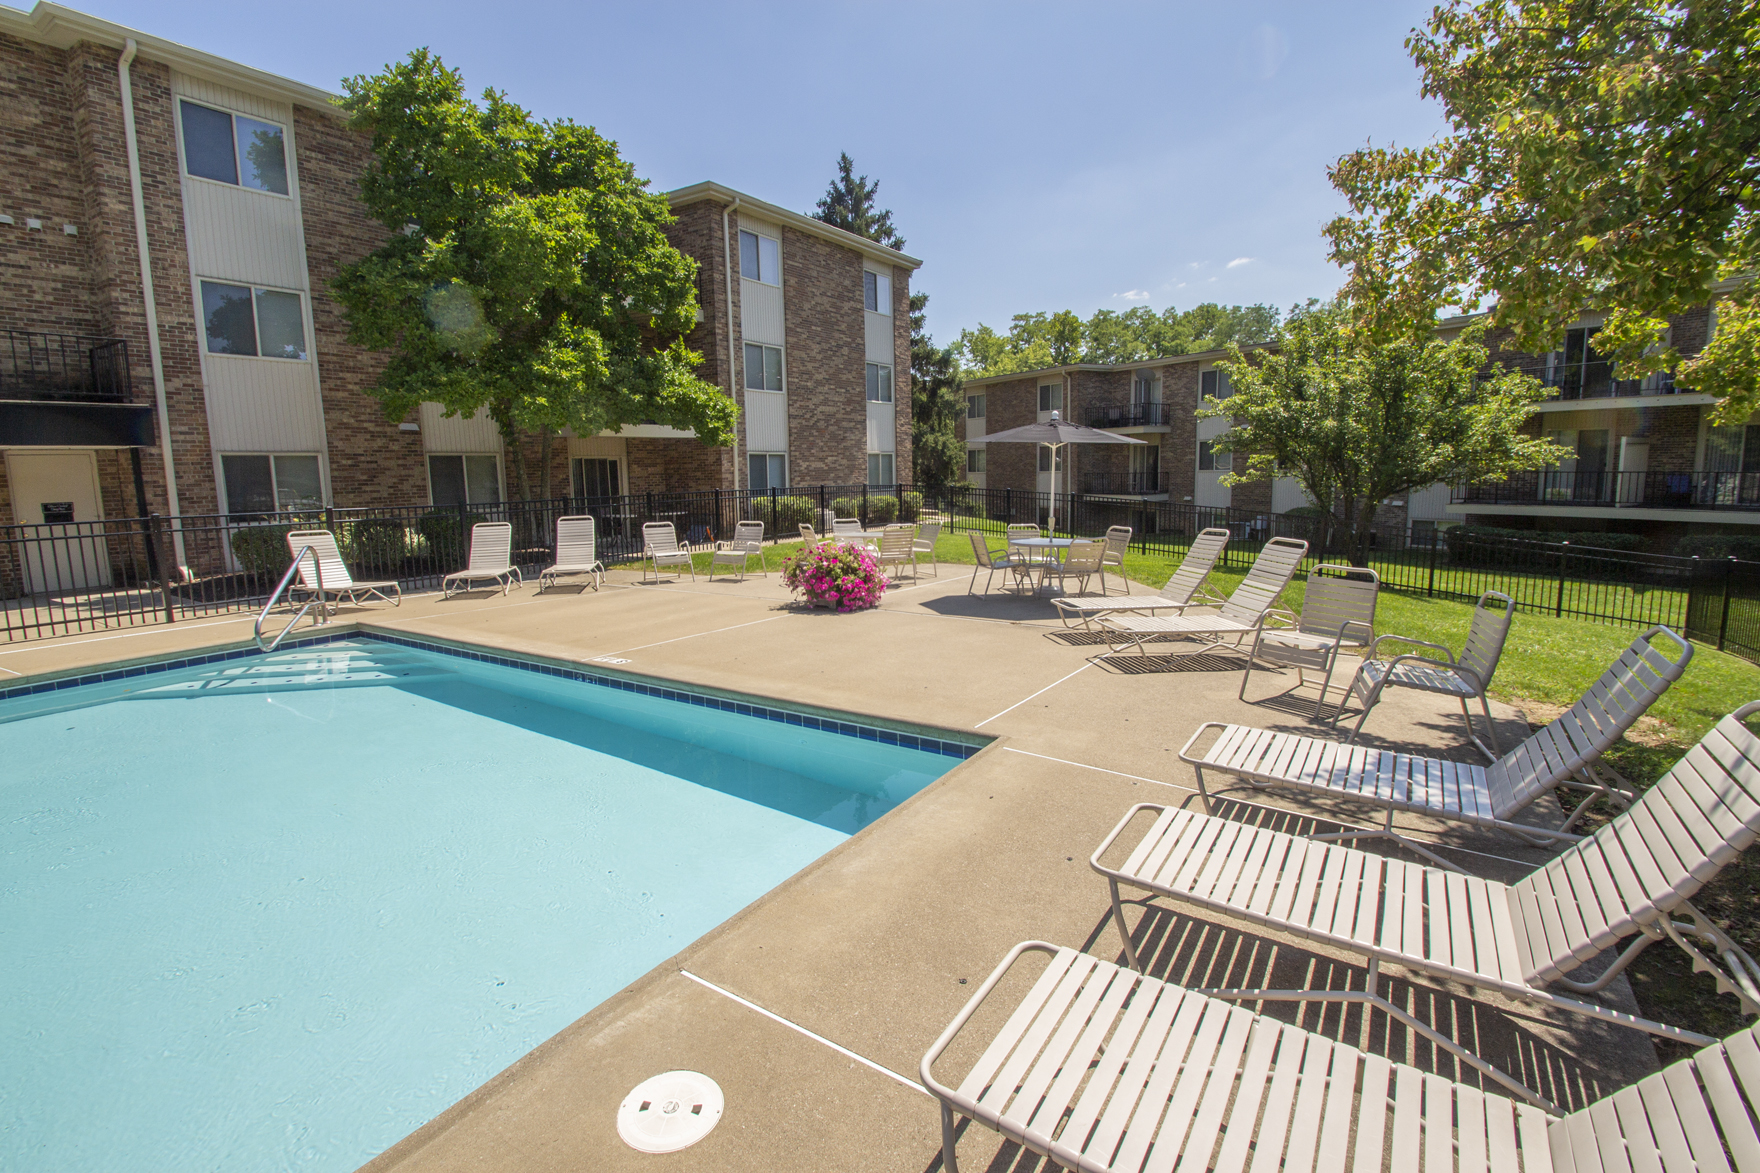 This is a photo of the pool area and building exteriors at Blue Grass Manor Apartments in Erlanger, KY.